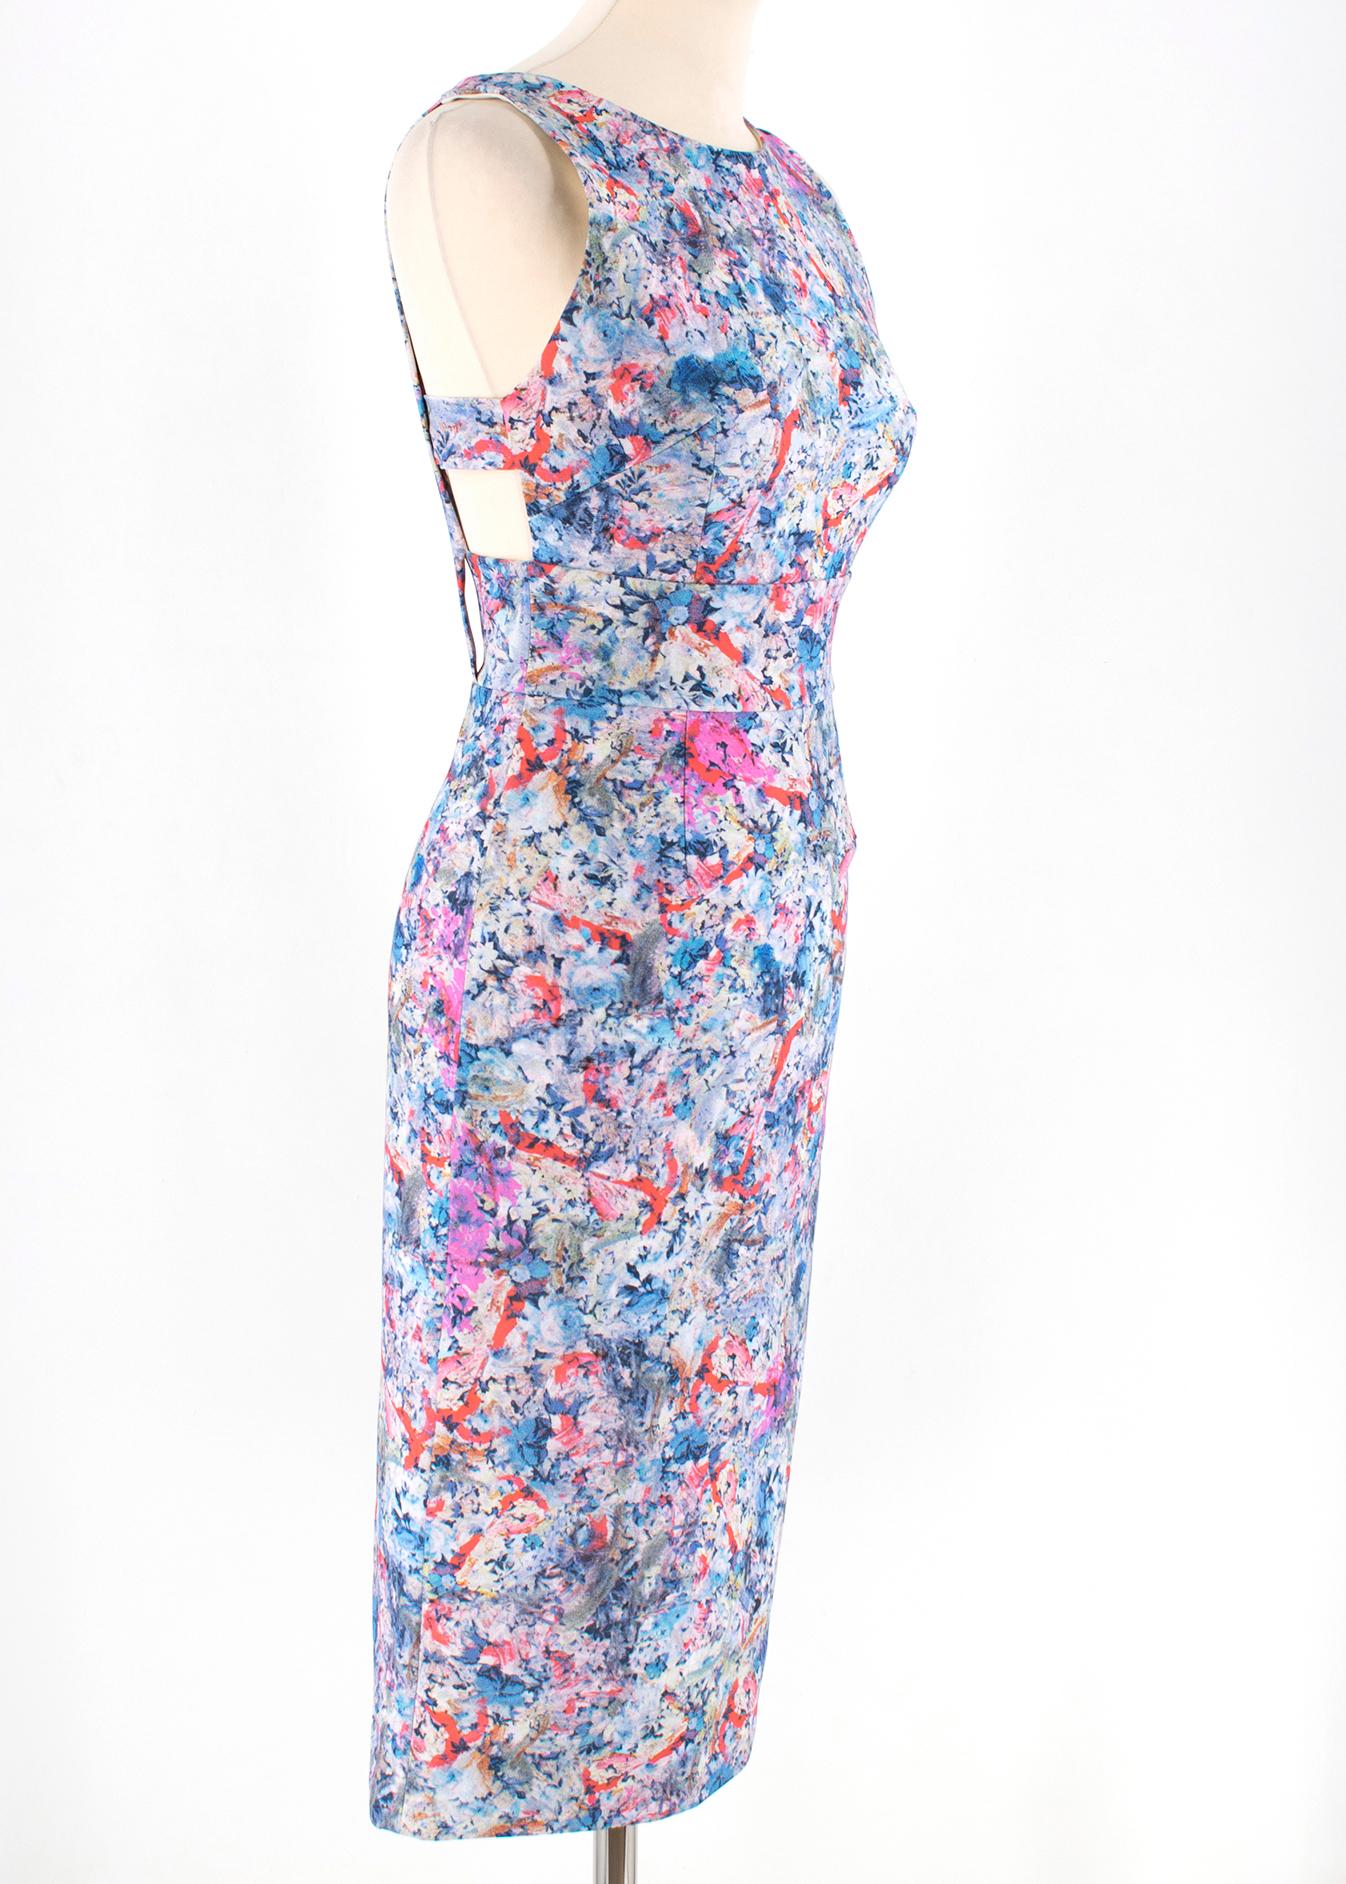 Erdem Blue Floral Patterned Midi dress.

High round neck dress
Thick belt detailing on waist
Pleated design dart stitch
Thin shoulder straps 
Open back
Hidden blue zip detailing
Midweight material
Silver hardware buckle closure

Please note, these